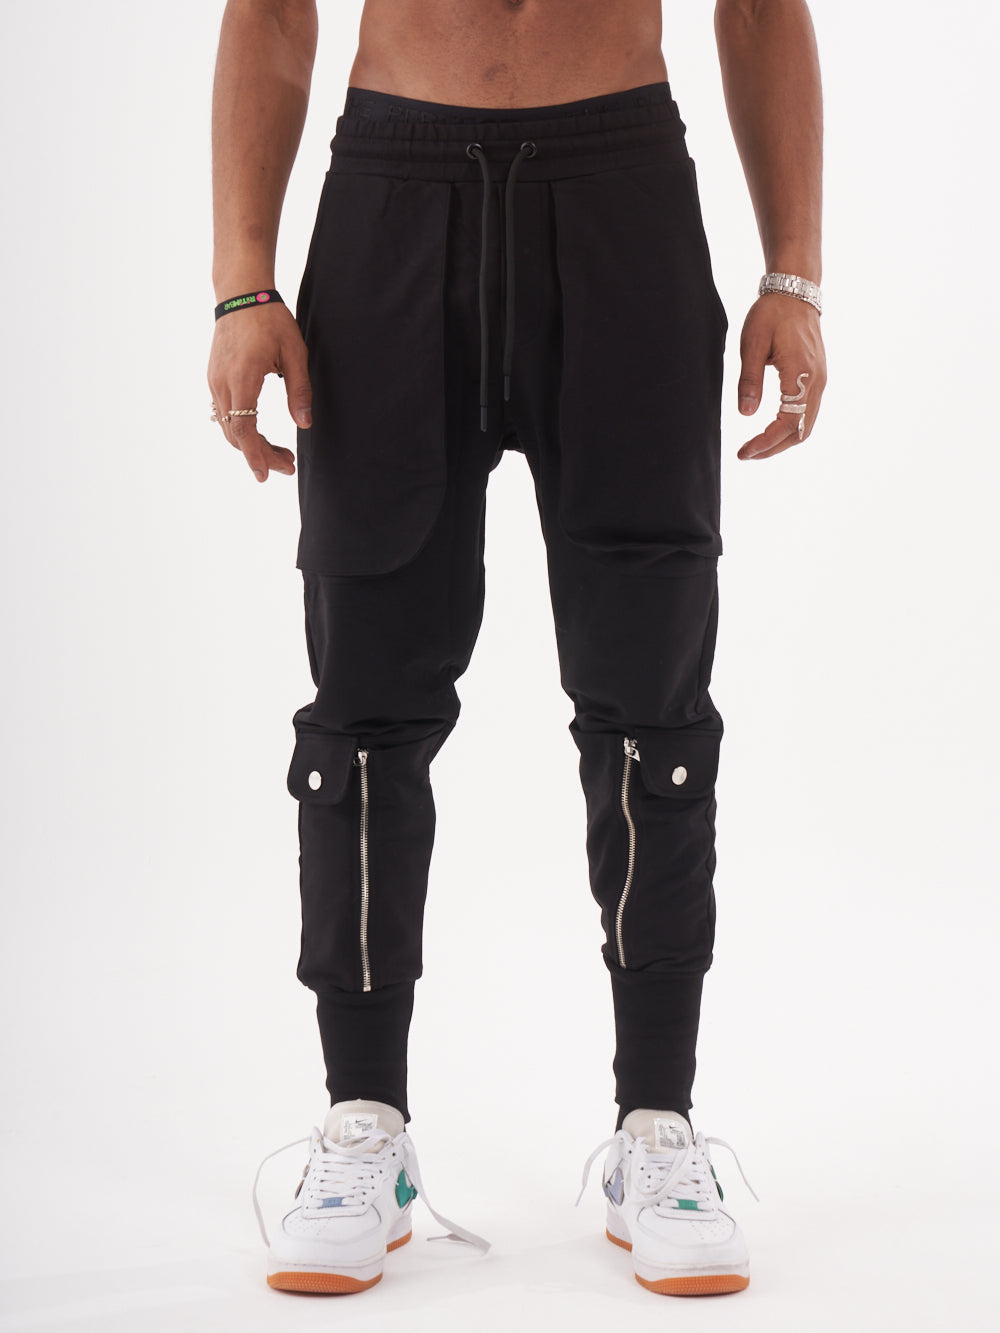 A man wearing GUERRILLA | BLACK jogger pants with zippers.